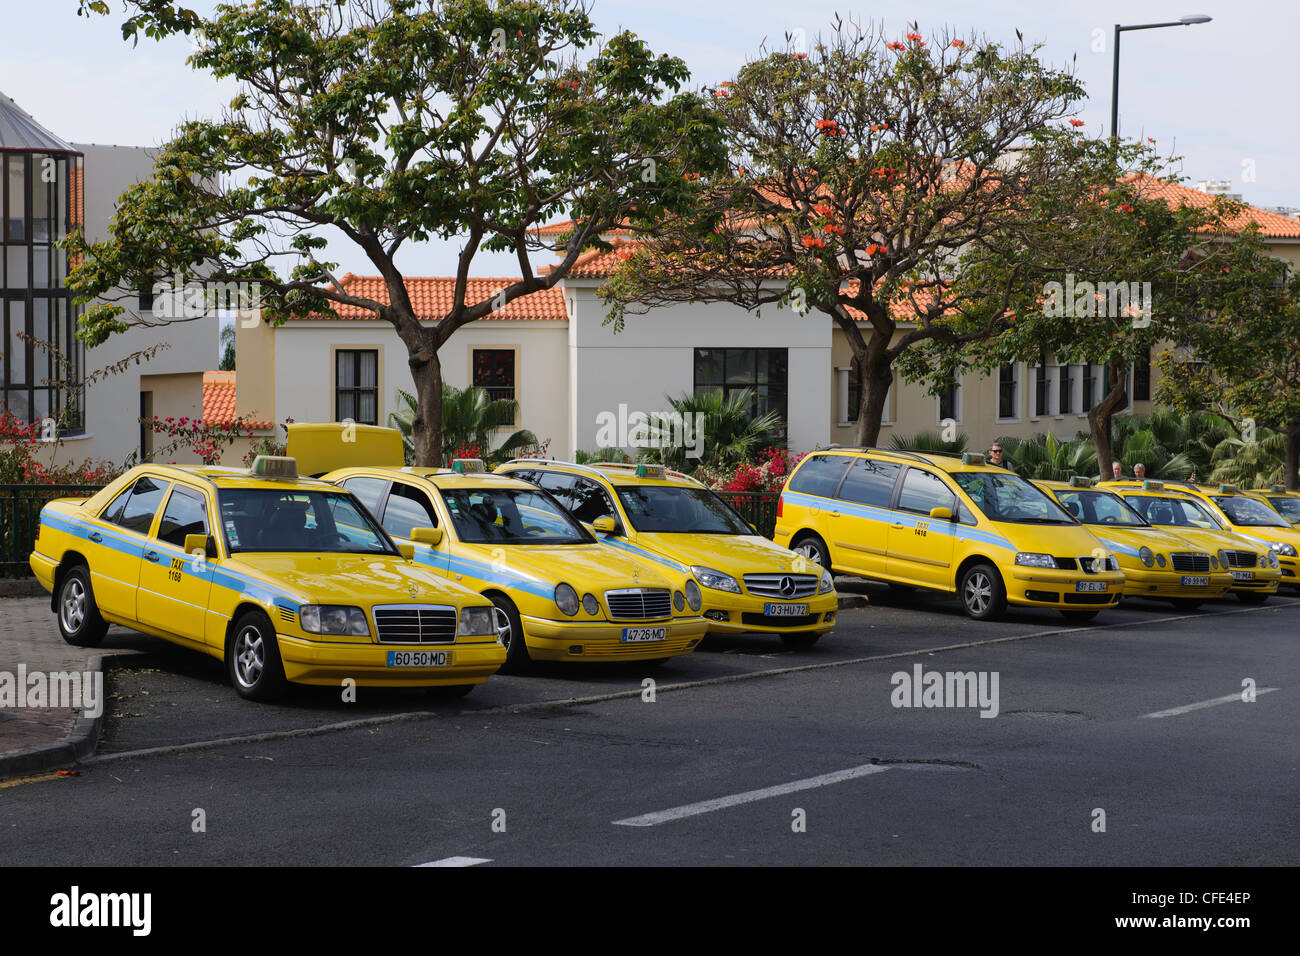 Distinctive yellow taxis Funchal Madeira Portugal Stock Photo